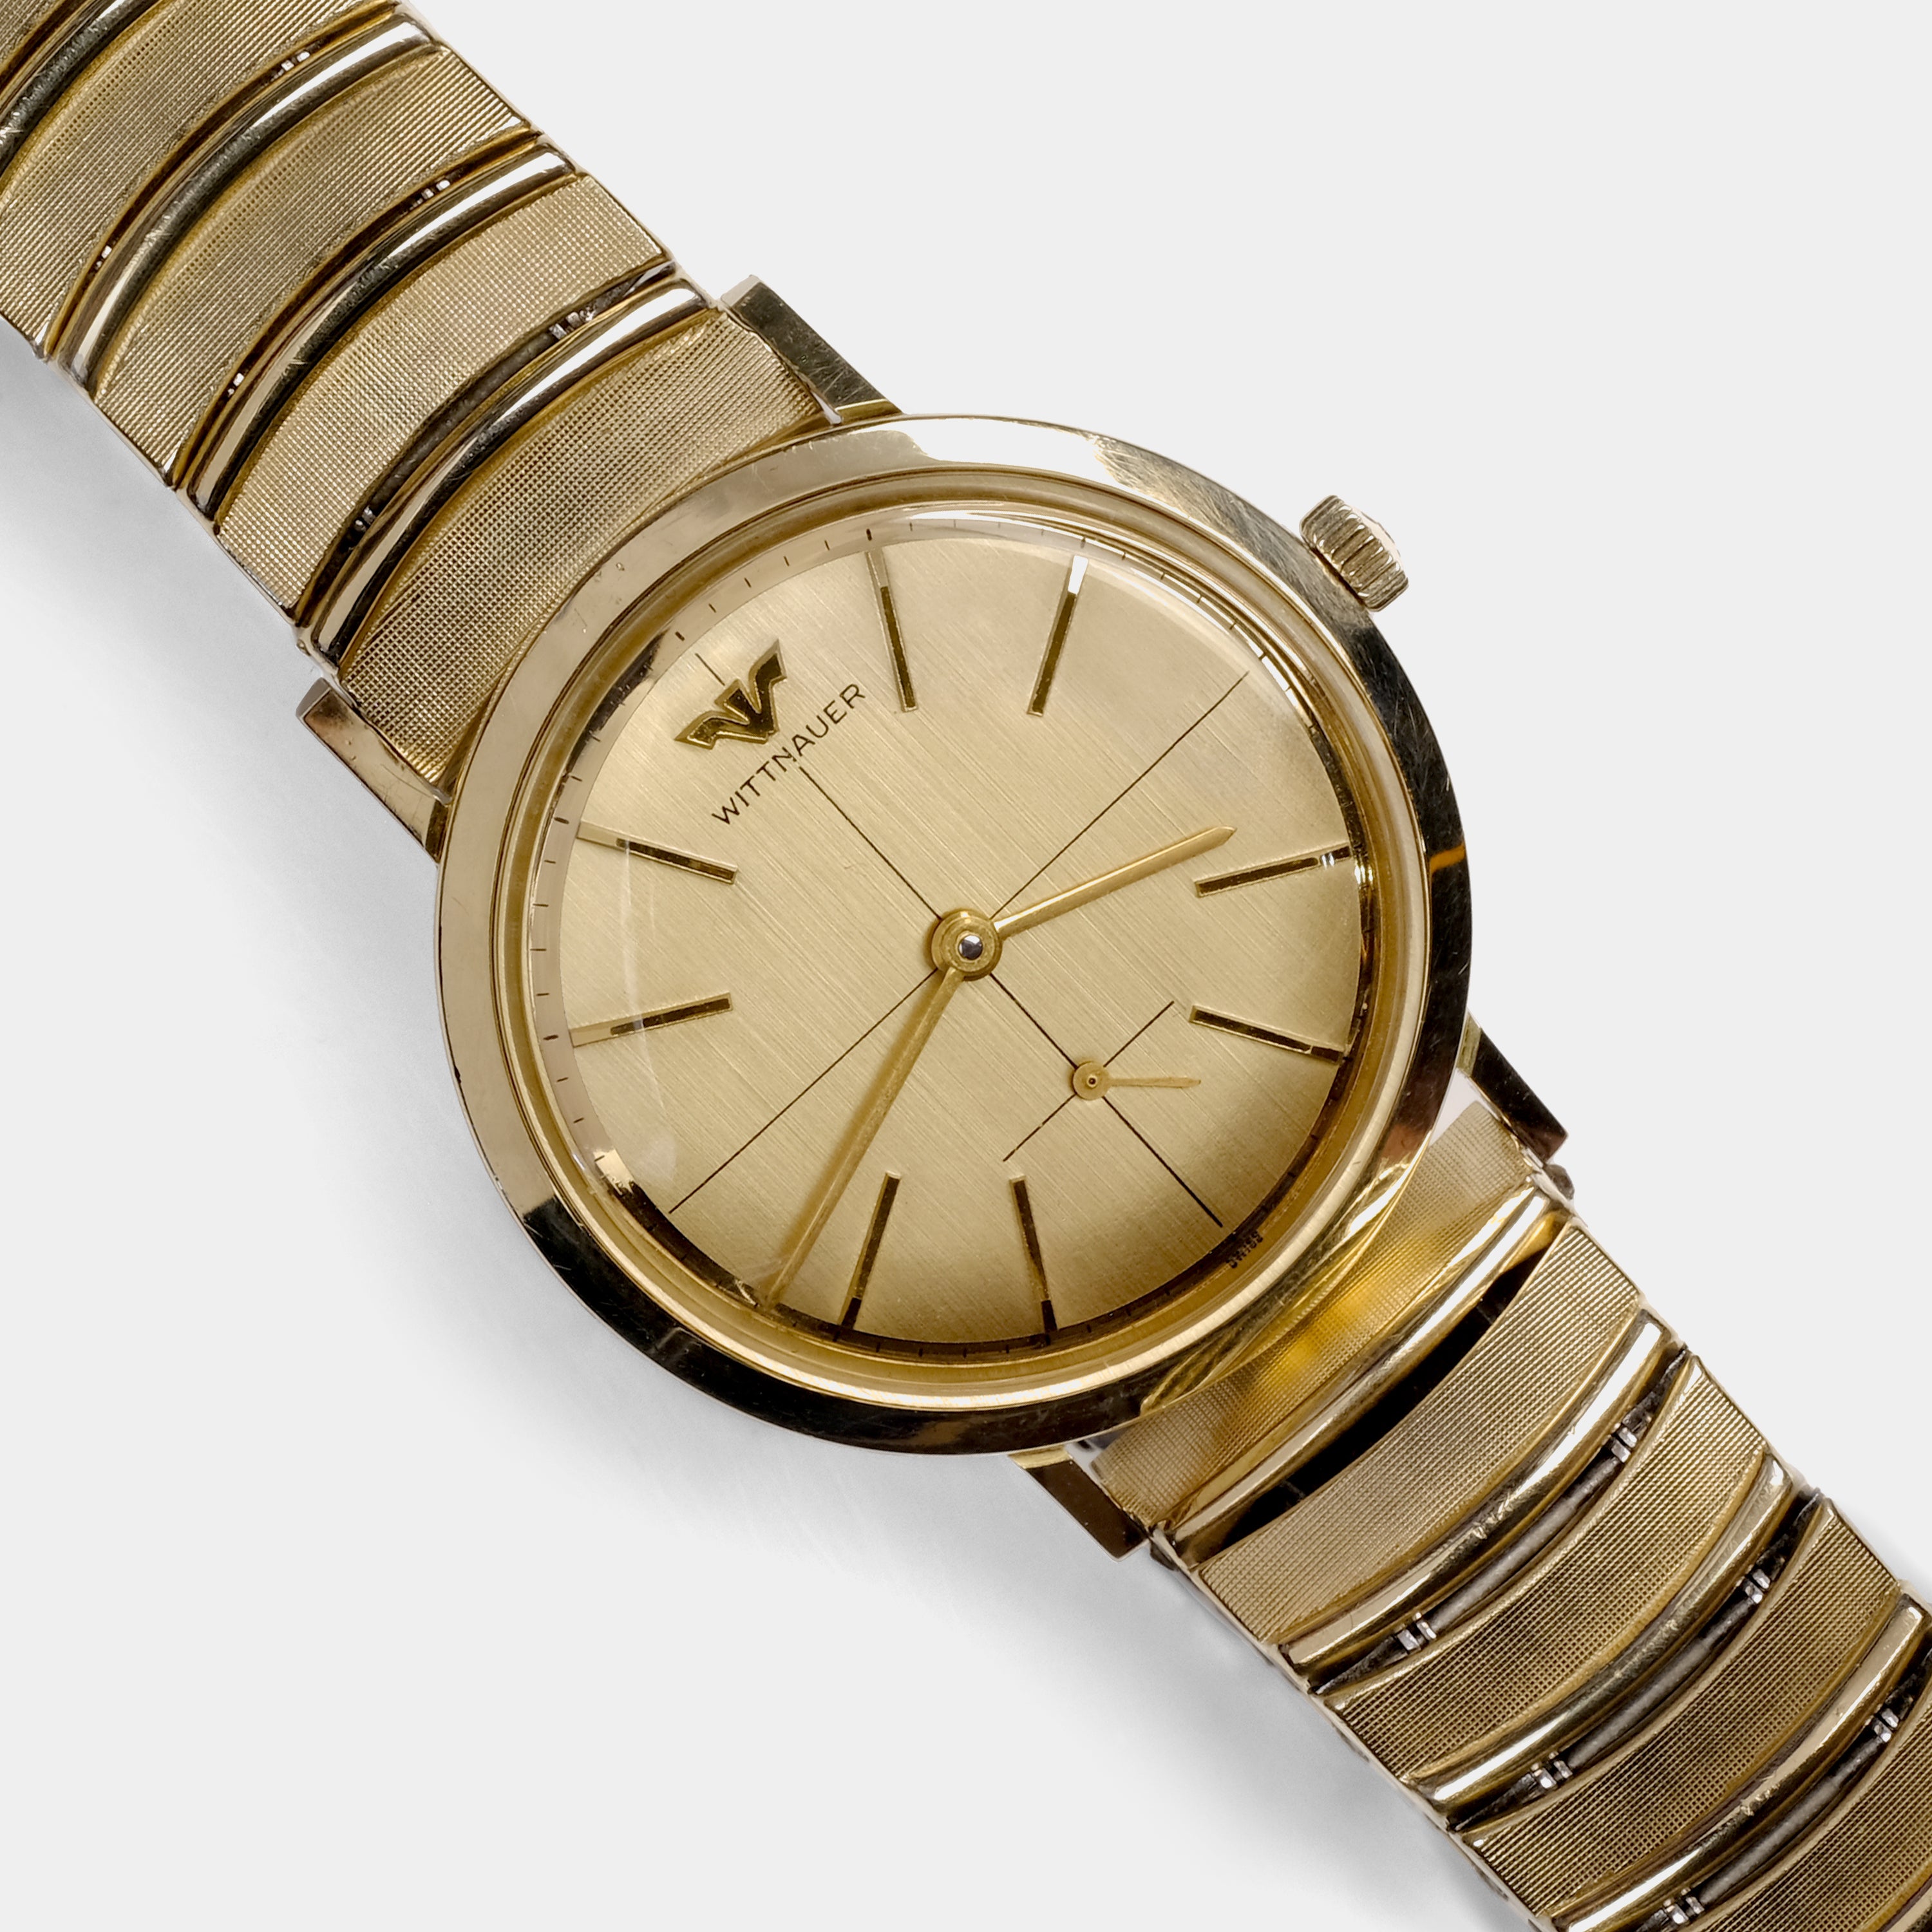 Wittnauer Sub-Seconds (Manual Winding) 10K Gold-Filled Case Circa 1960 Wristwatch